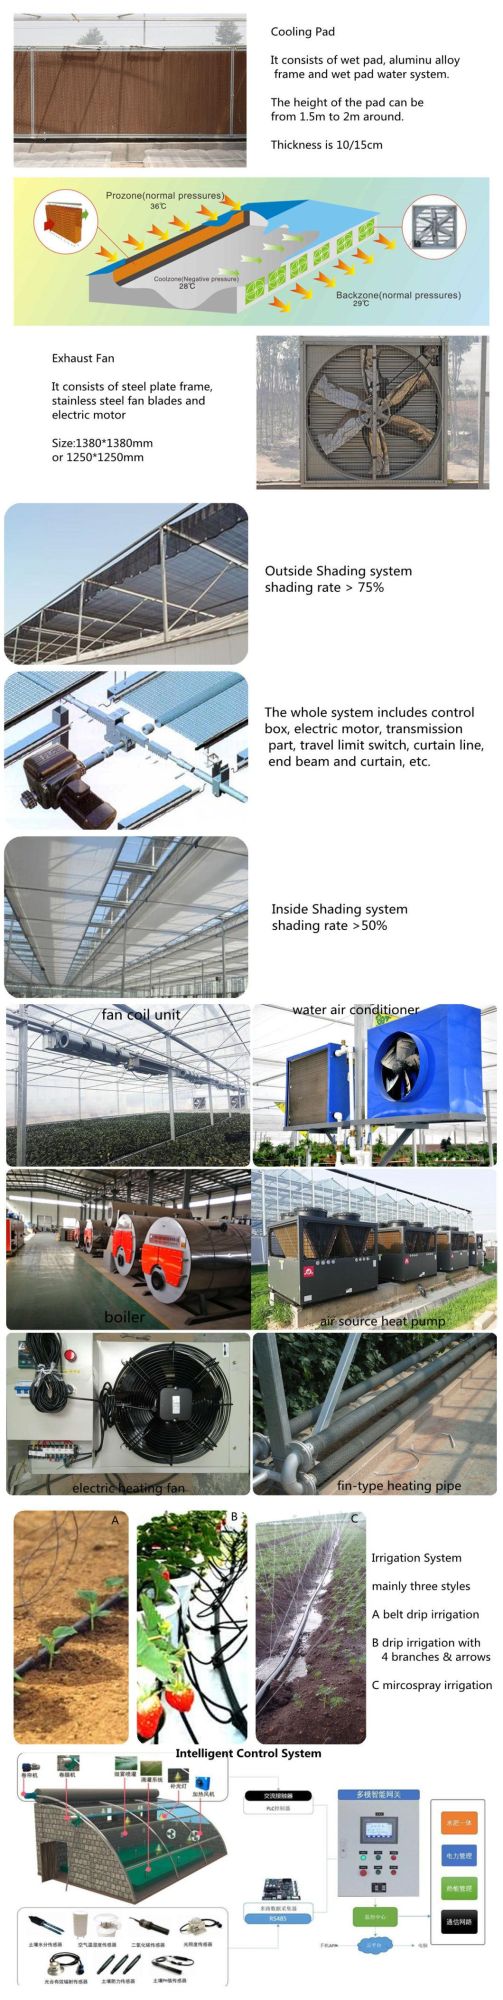 Prefabricated Auto/Semi-Auto Pneumatic Seedling Machine with Watering Station for Dibbling/Sowing/Soil Covering/Watering for Greenhouse Farming